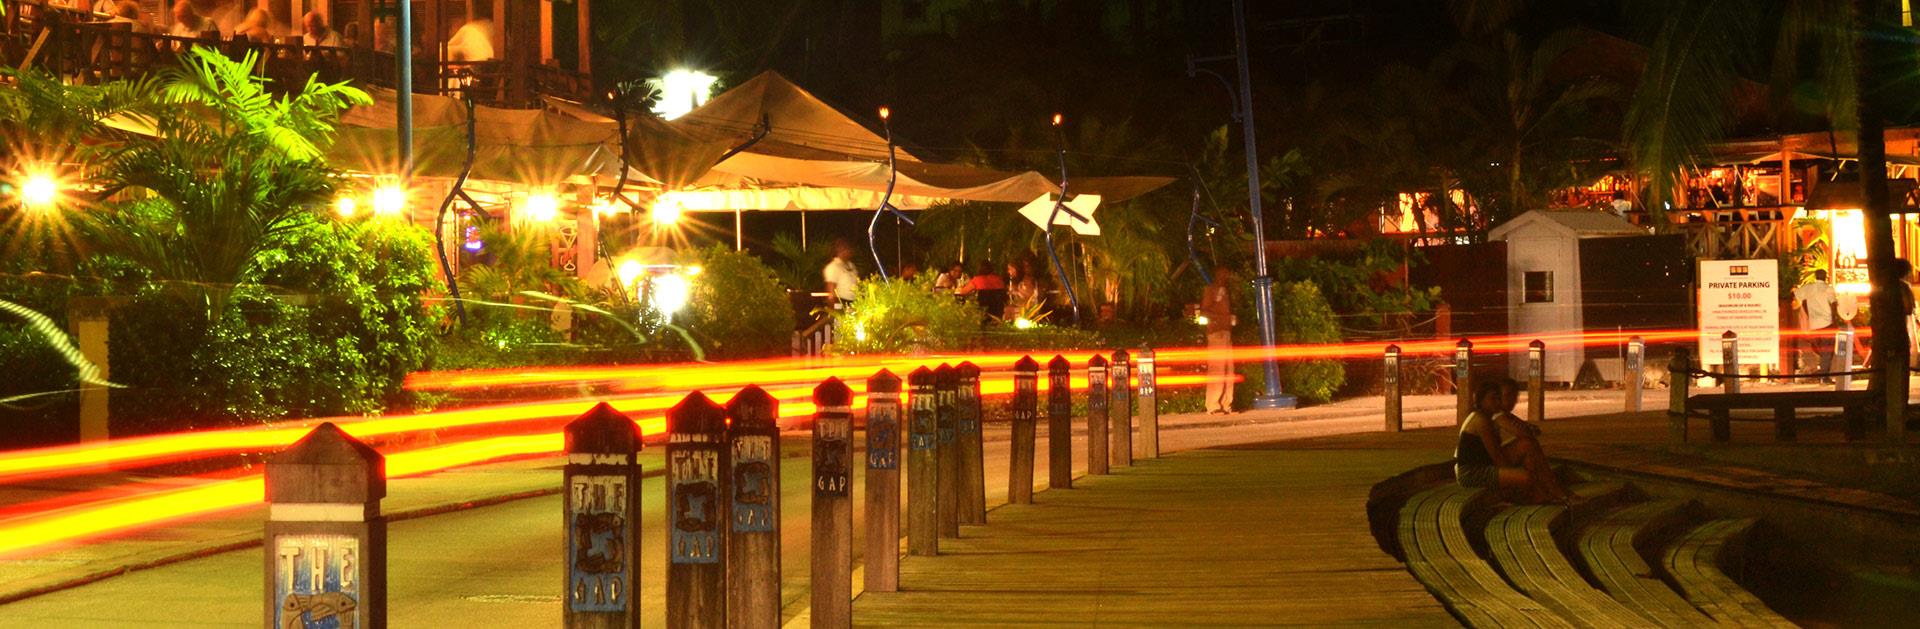 The Best Caribbean Nightlife On Show In St Lawrence Gap Barbados